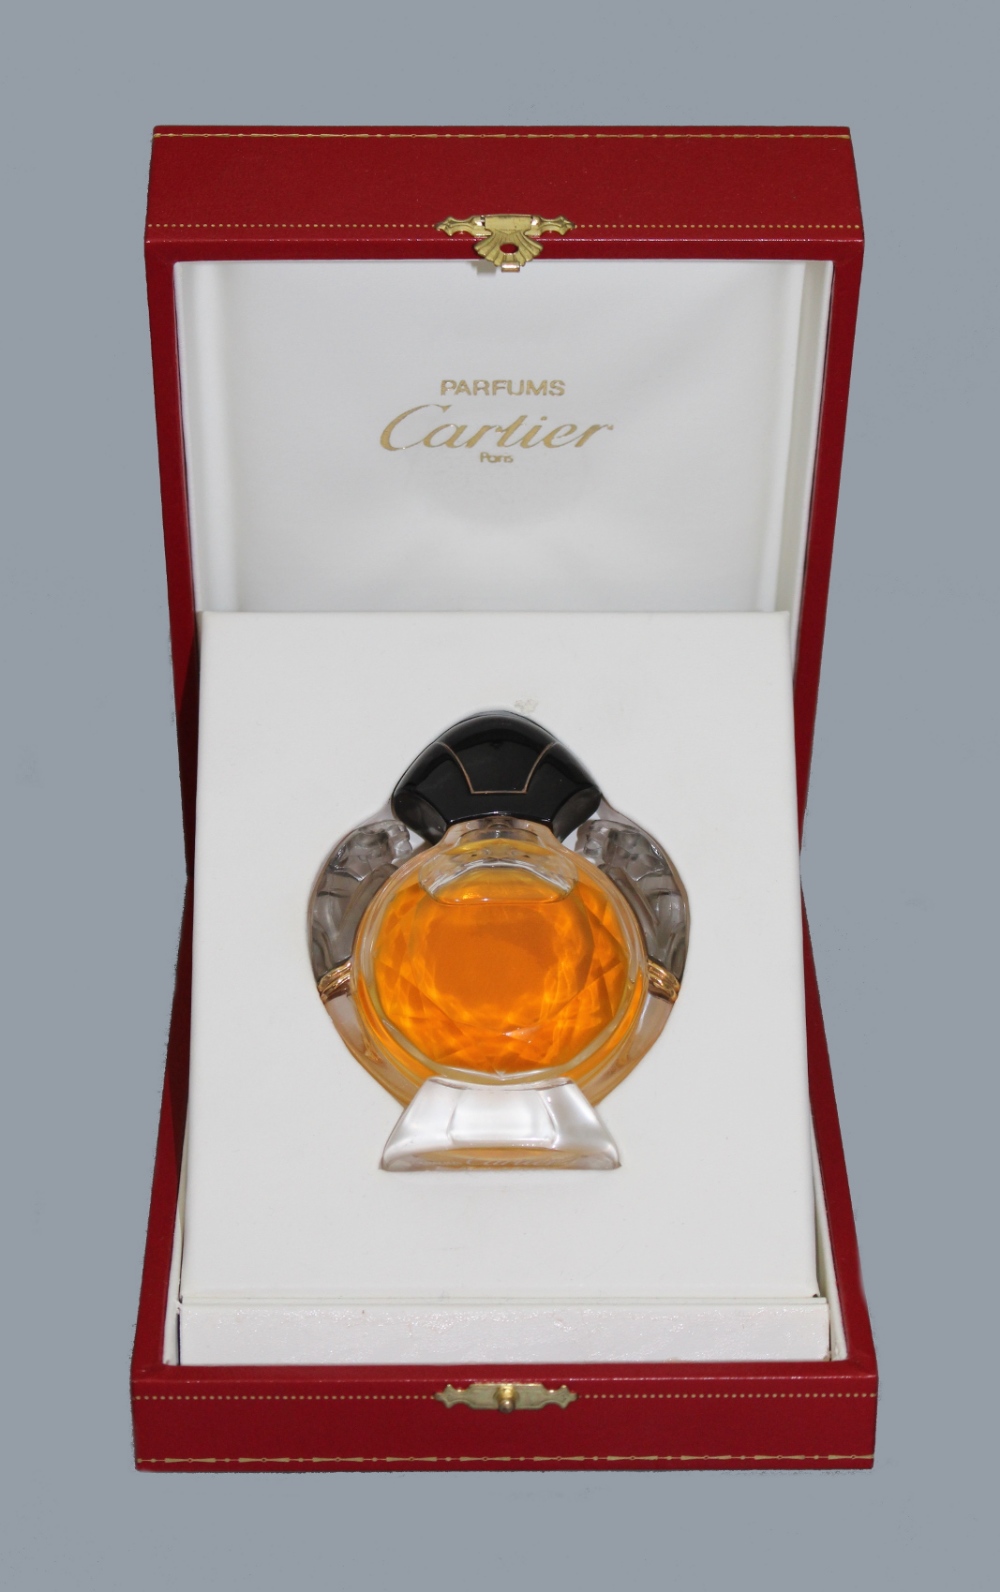 A private collection of perfume bottles - CARTIER - Panthere de Cartier, no. 67425140, 30ml